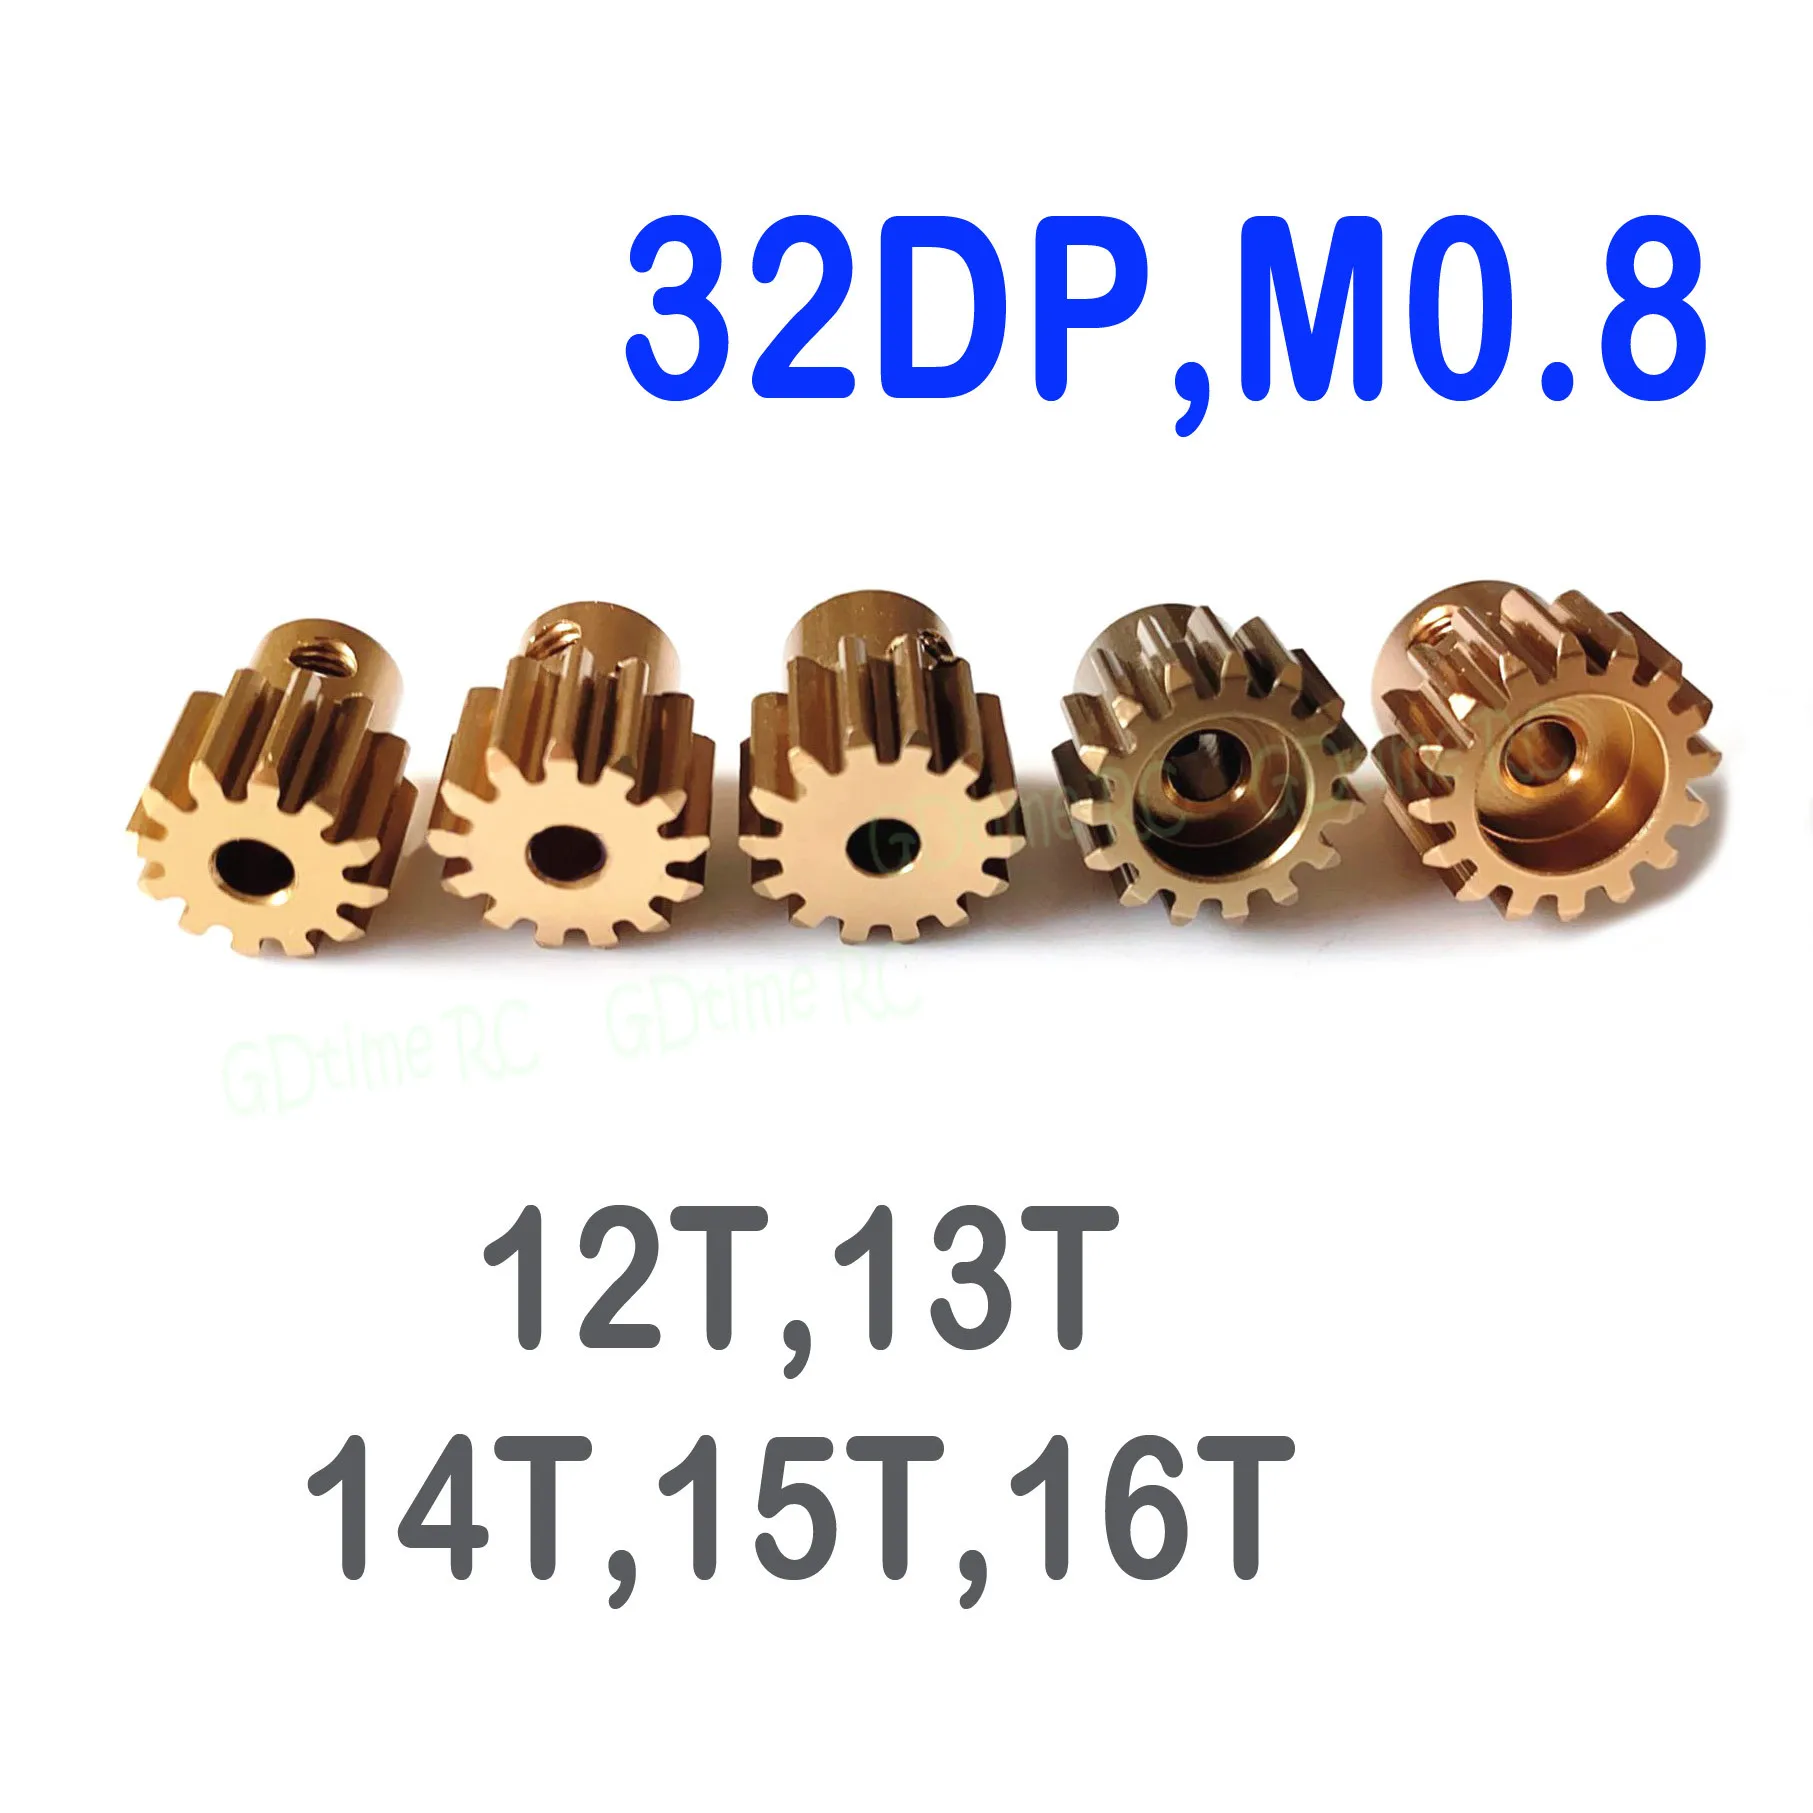 Metal Copper Gears 12T 13T 14T 15T 16T 32P Mod .8 3.175mm Pinion Gear for Traxxas 1/10 Truck Brushed Brushless Motor RC Car